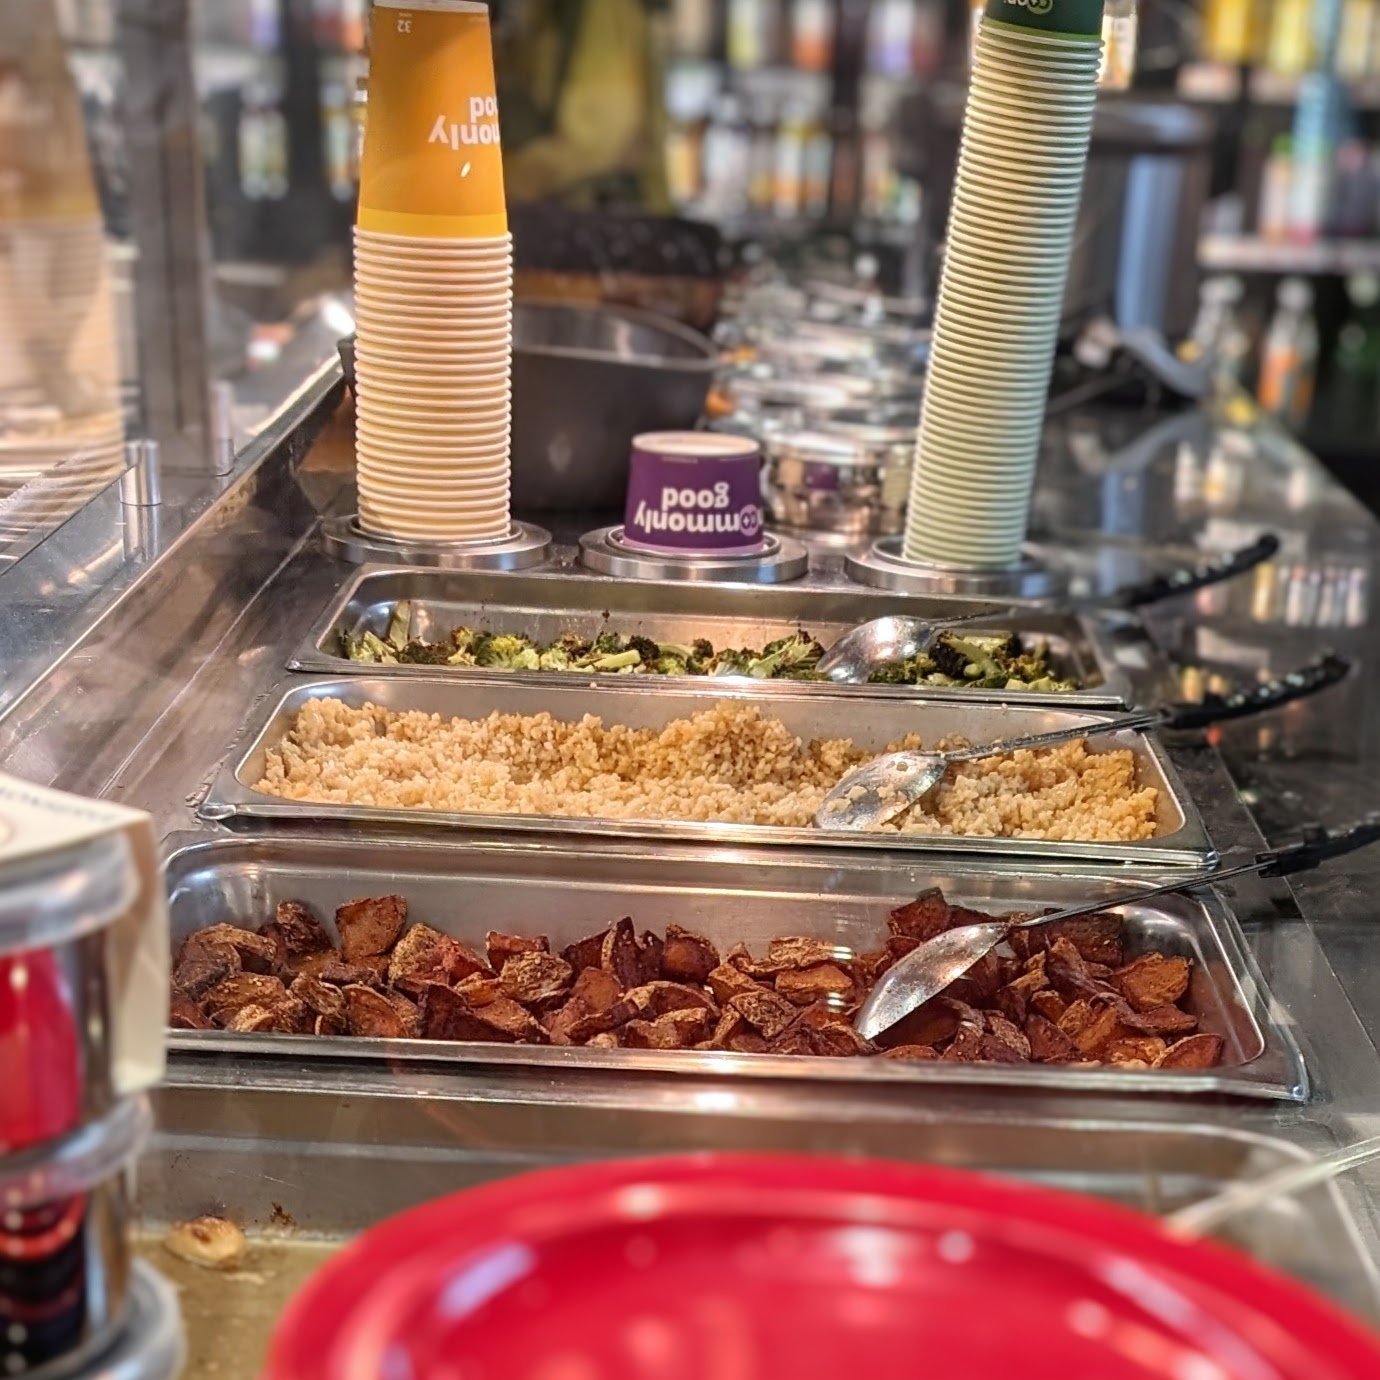 Did you know? Our hot bar and salad bar are made fresh daily! Swing by for a delicious, healthy meal that's perfect for any budget. 🥗🍲